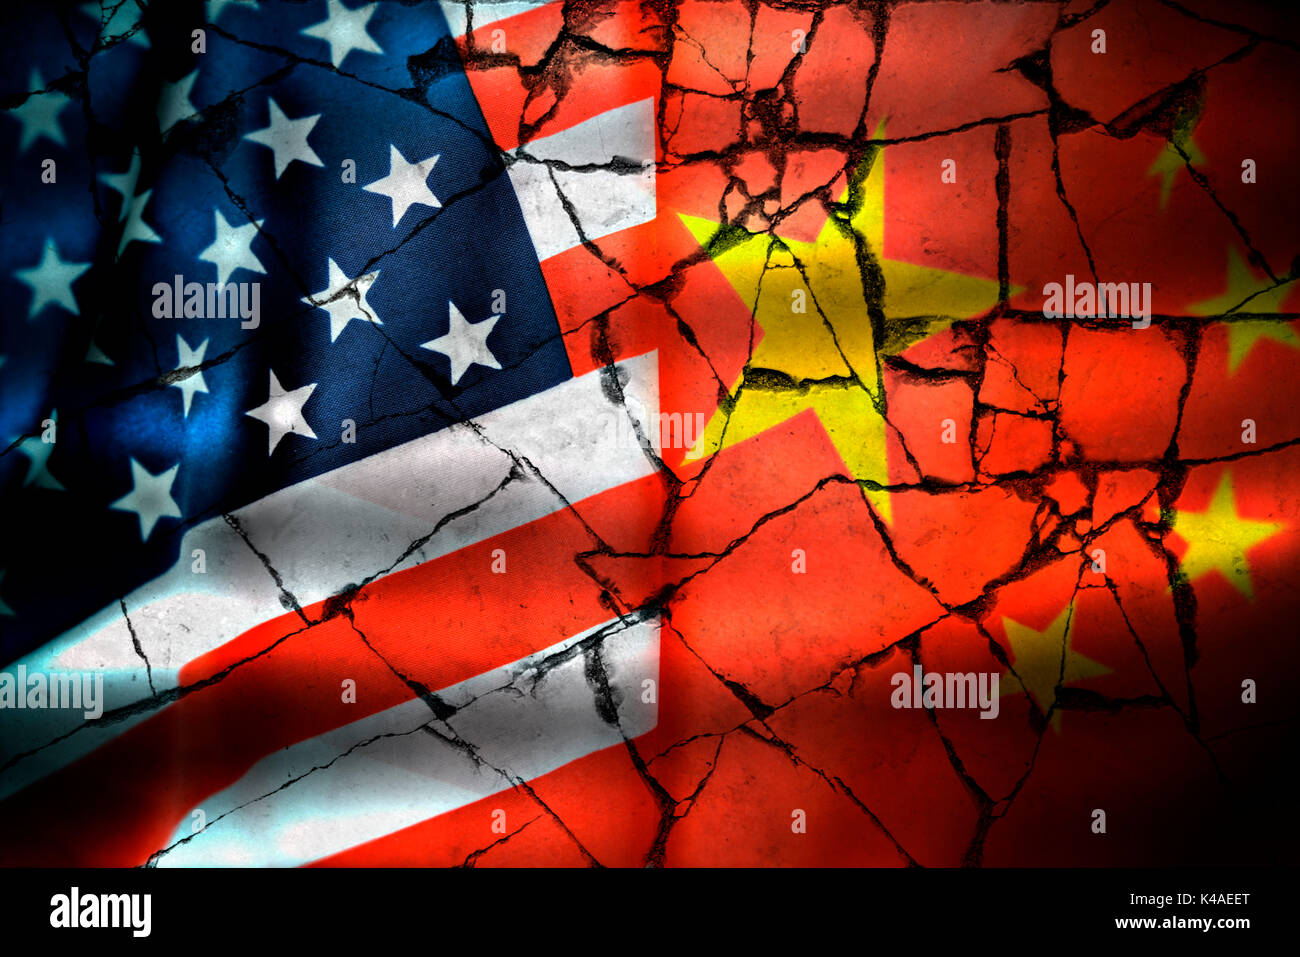 Flags Of The Usa And China On Cracked Ground, Trade War Stock Photo